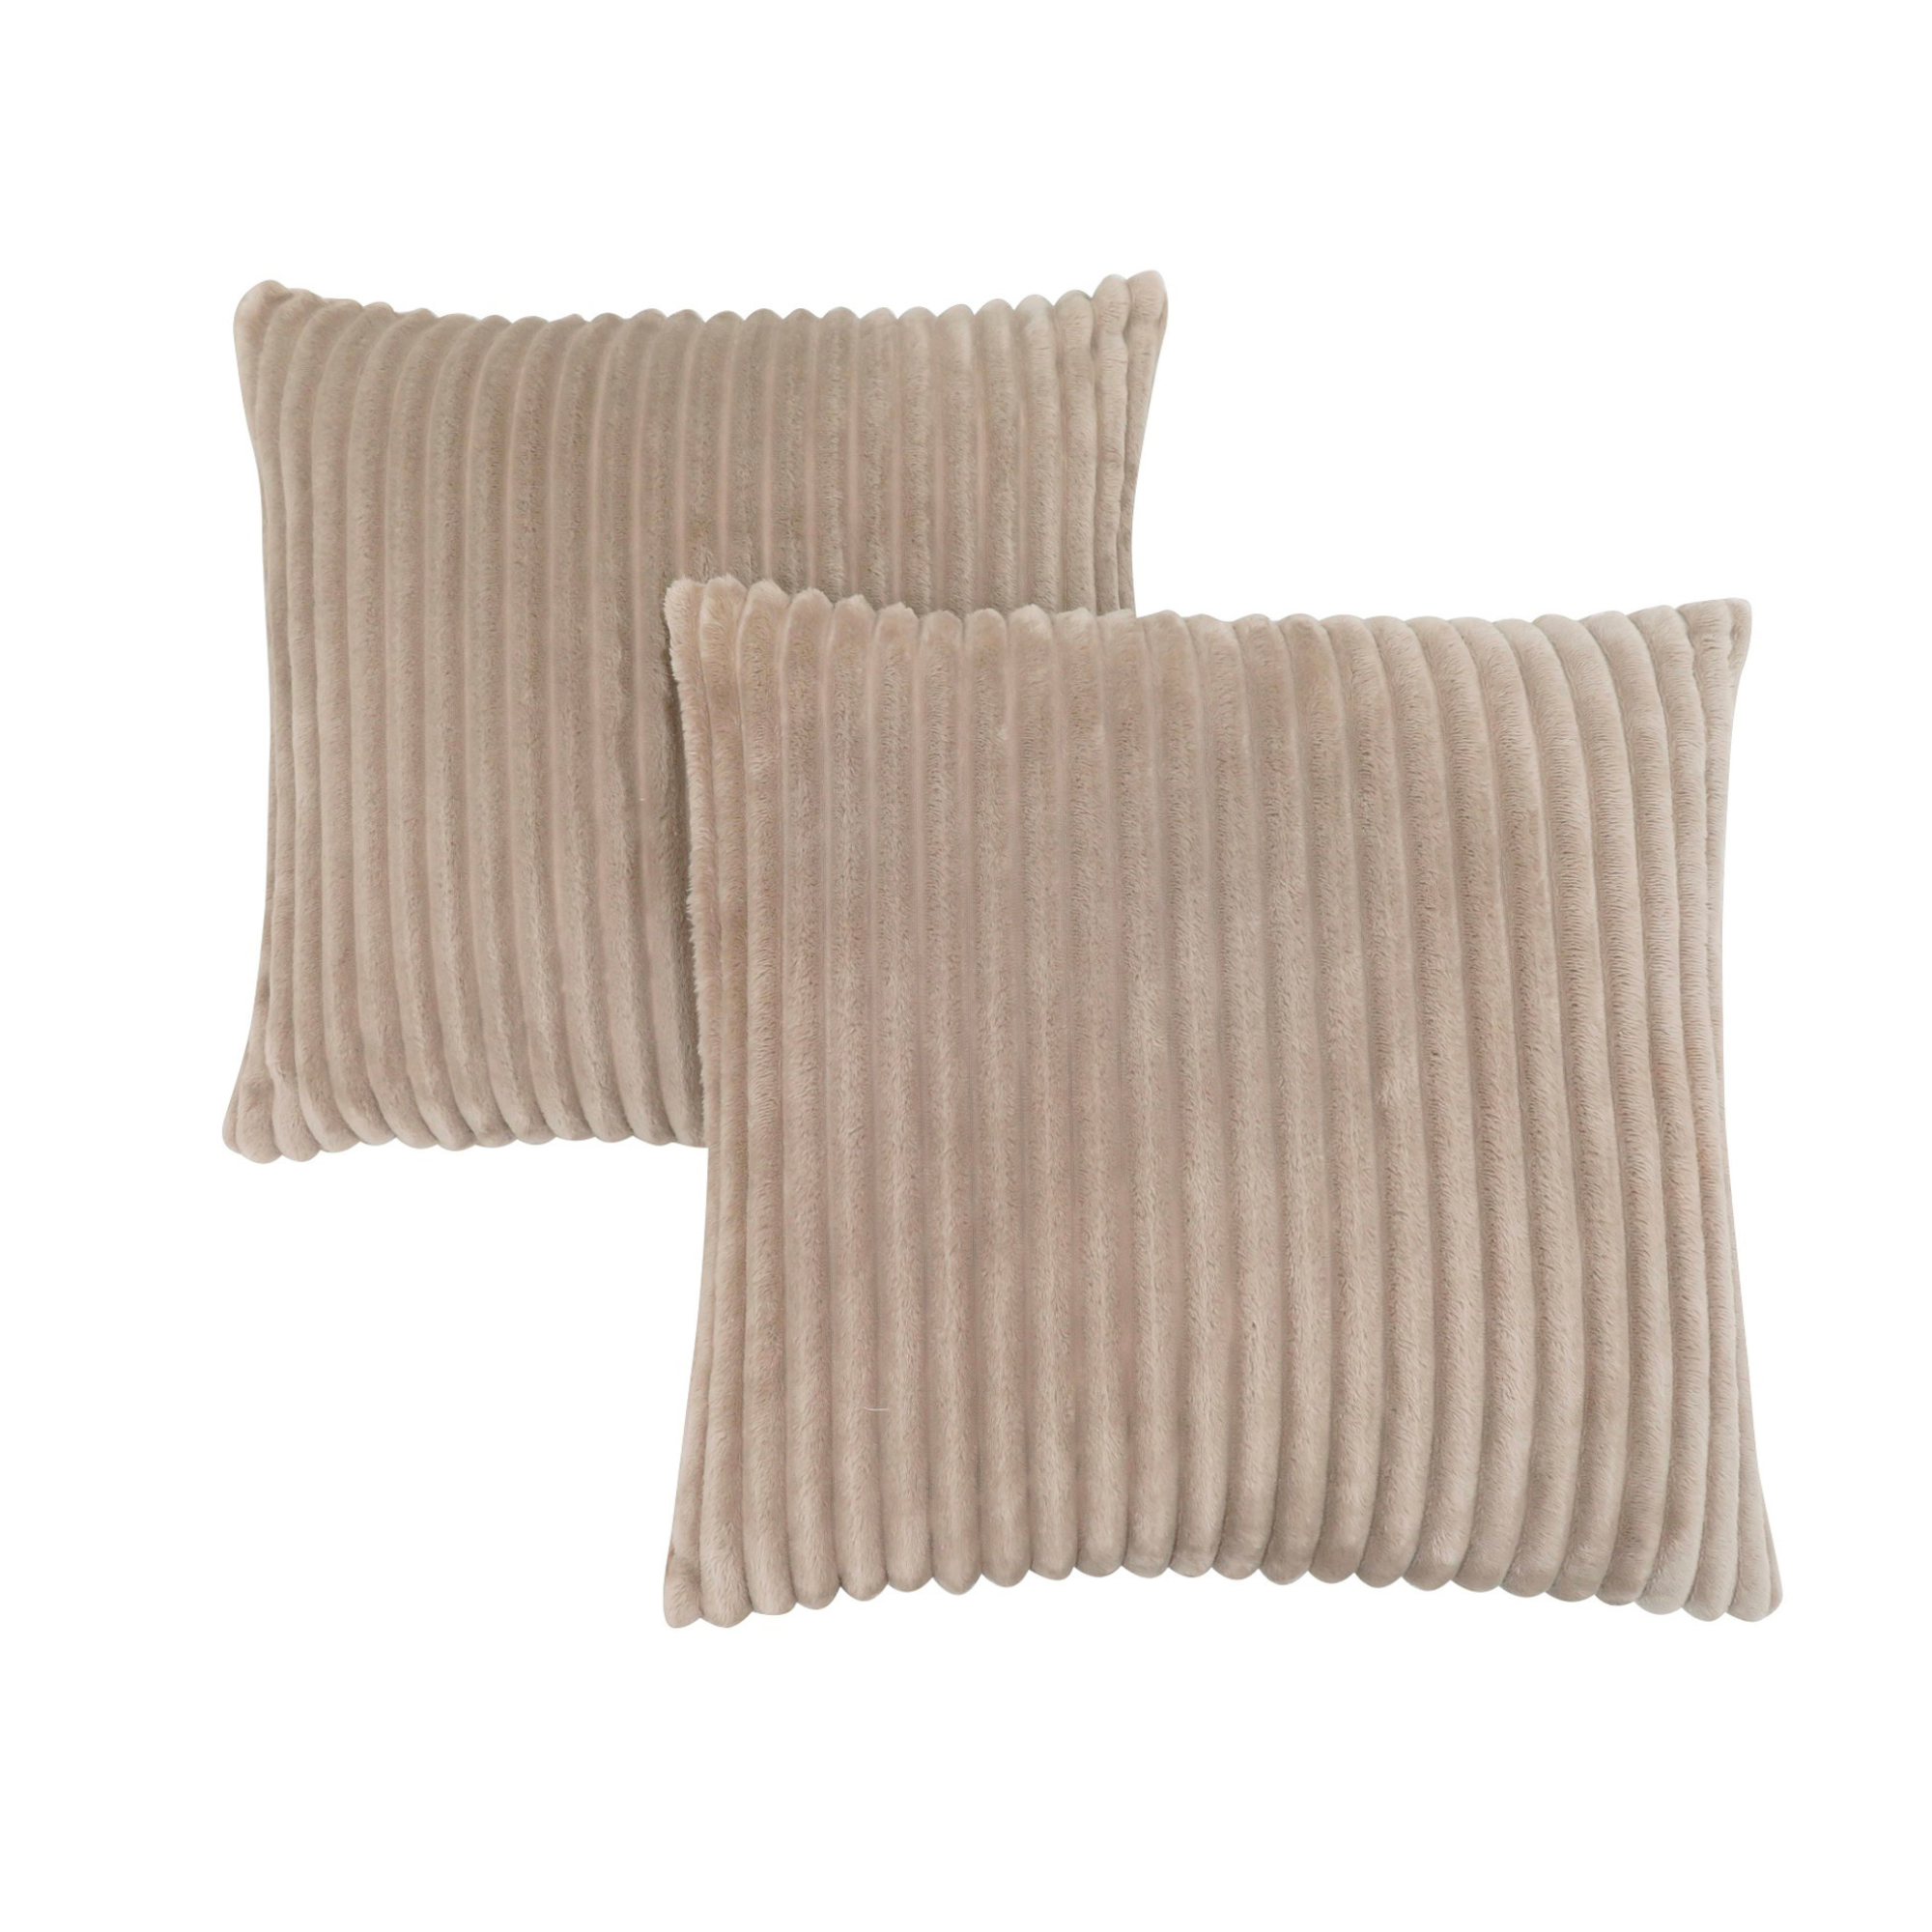 PILLOW - 18"X 18" / BEIGE ULTRA SOFT RIBBED STYLE / 2PCS